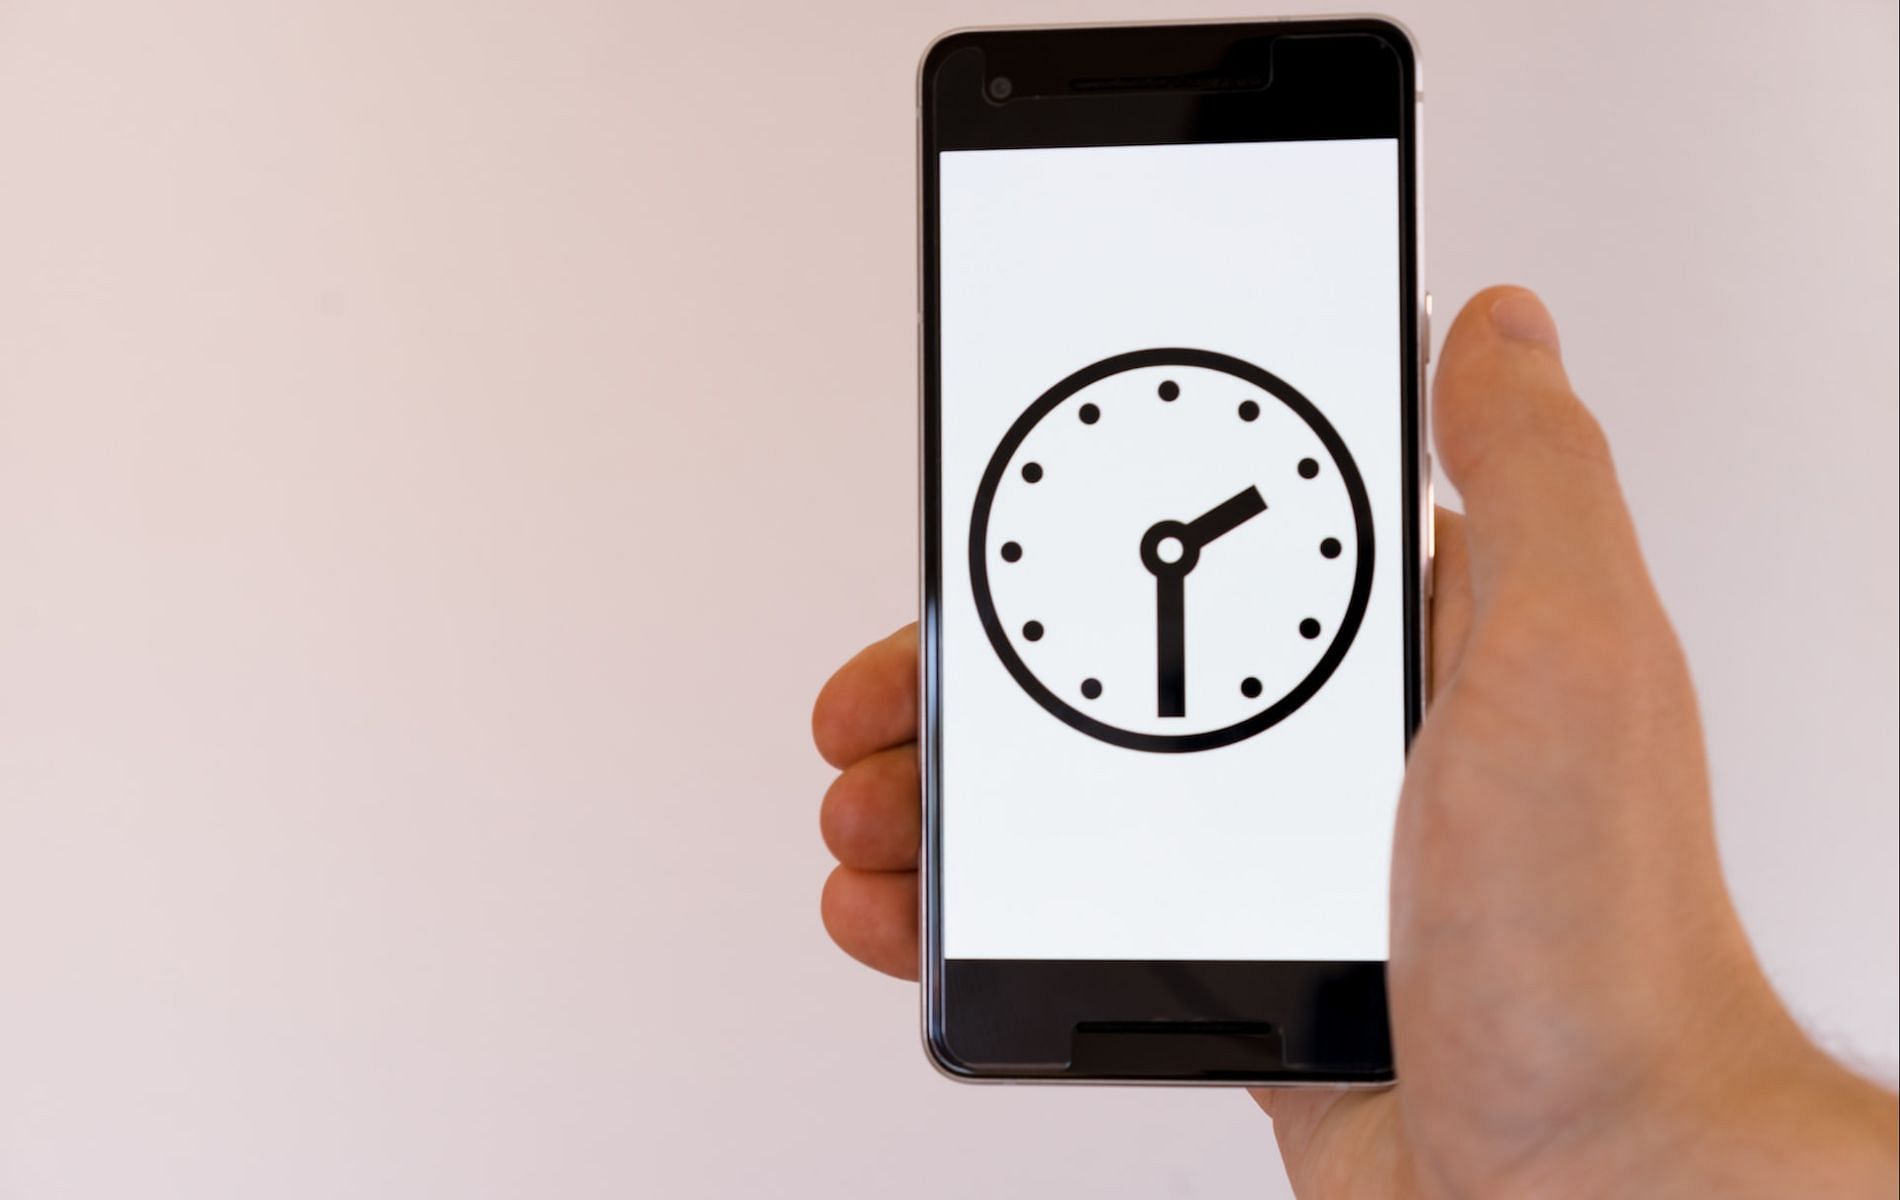 Changing the time zone on an Android phone is easy. (Image via Unsplash)